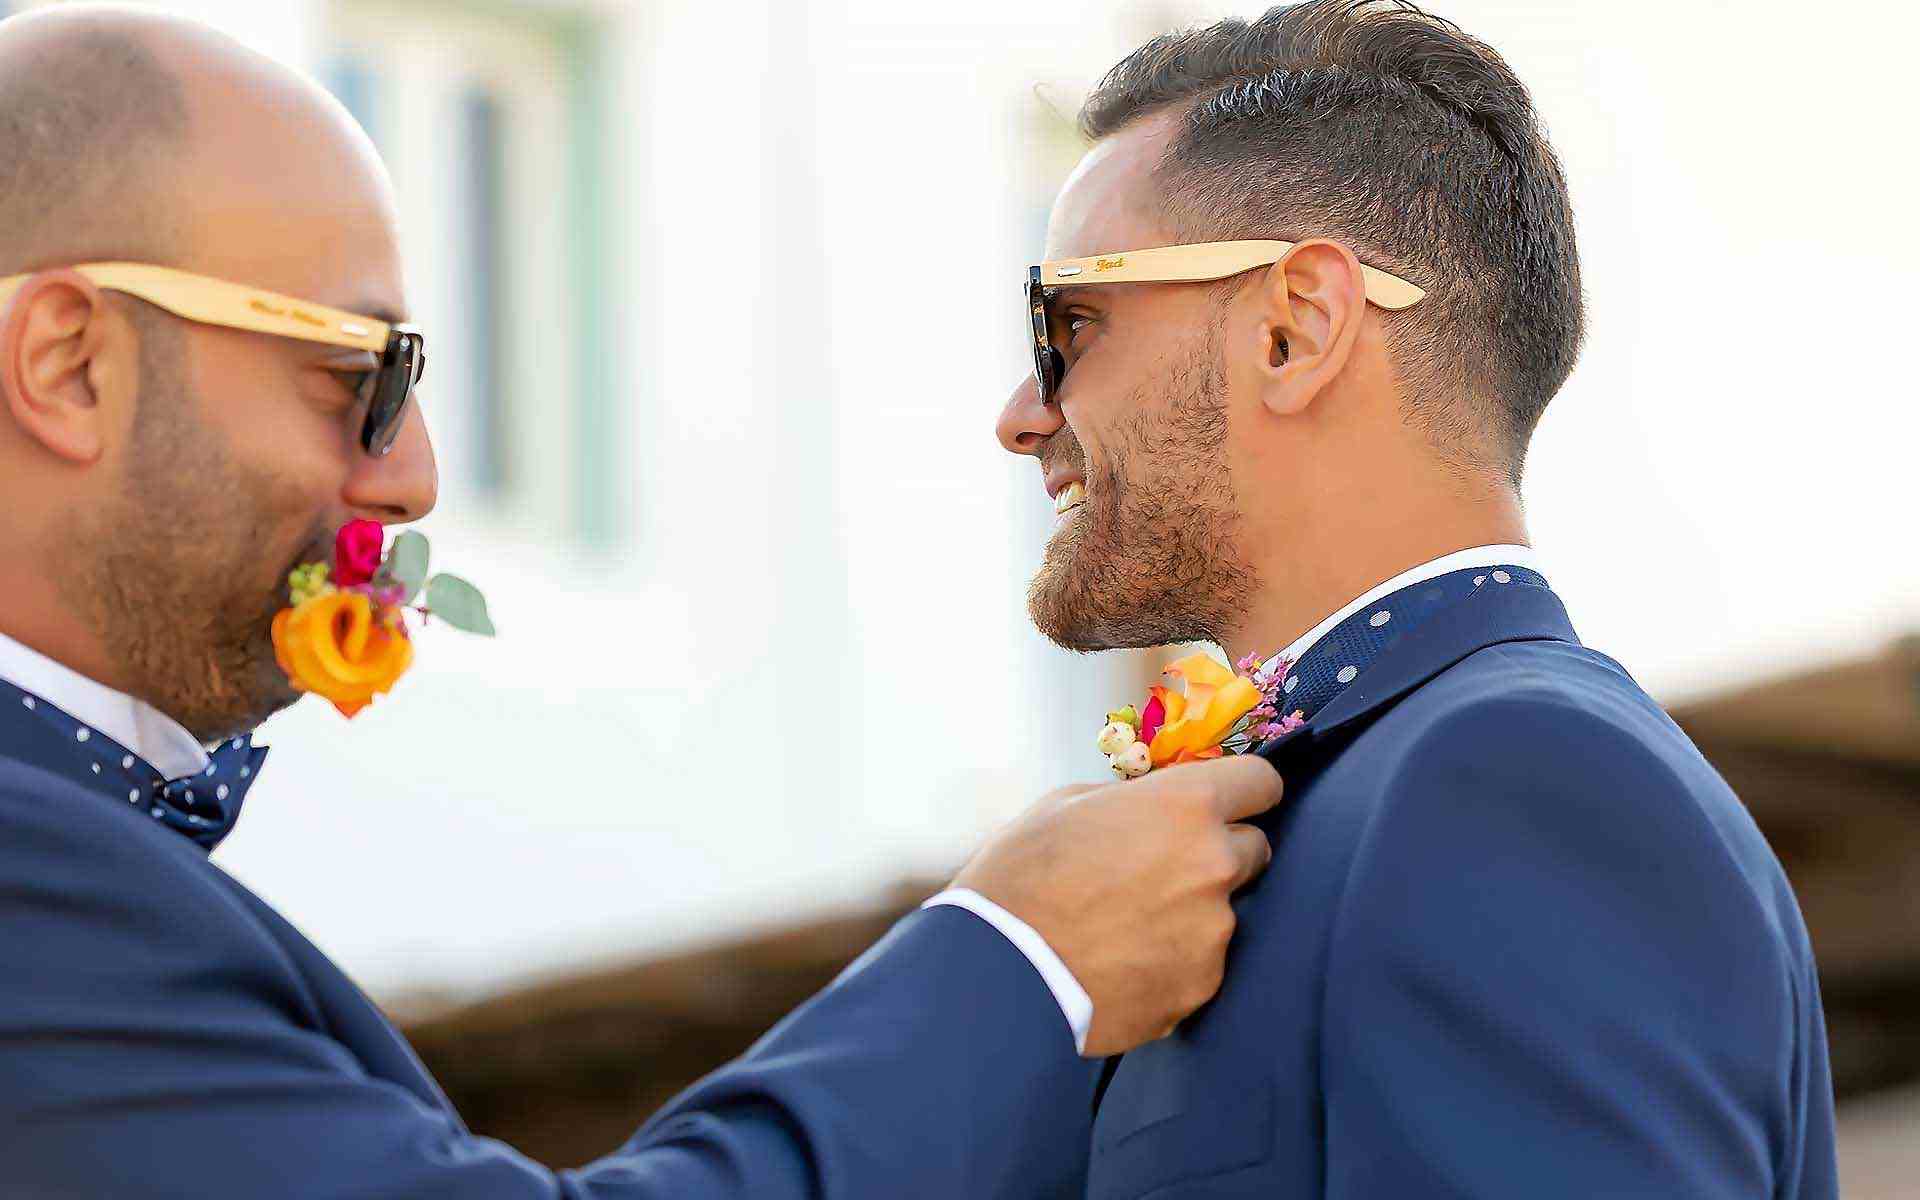 The-Brother-Of-The-Groom-Is-Putting-The-Boho-Style-Boutonniere-To-The-Groom